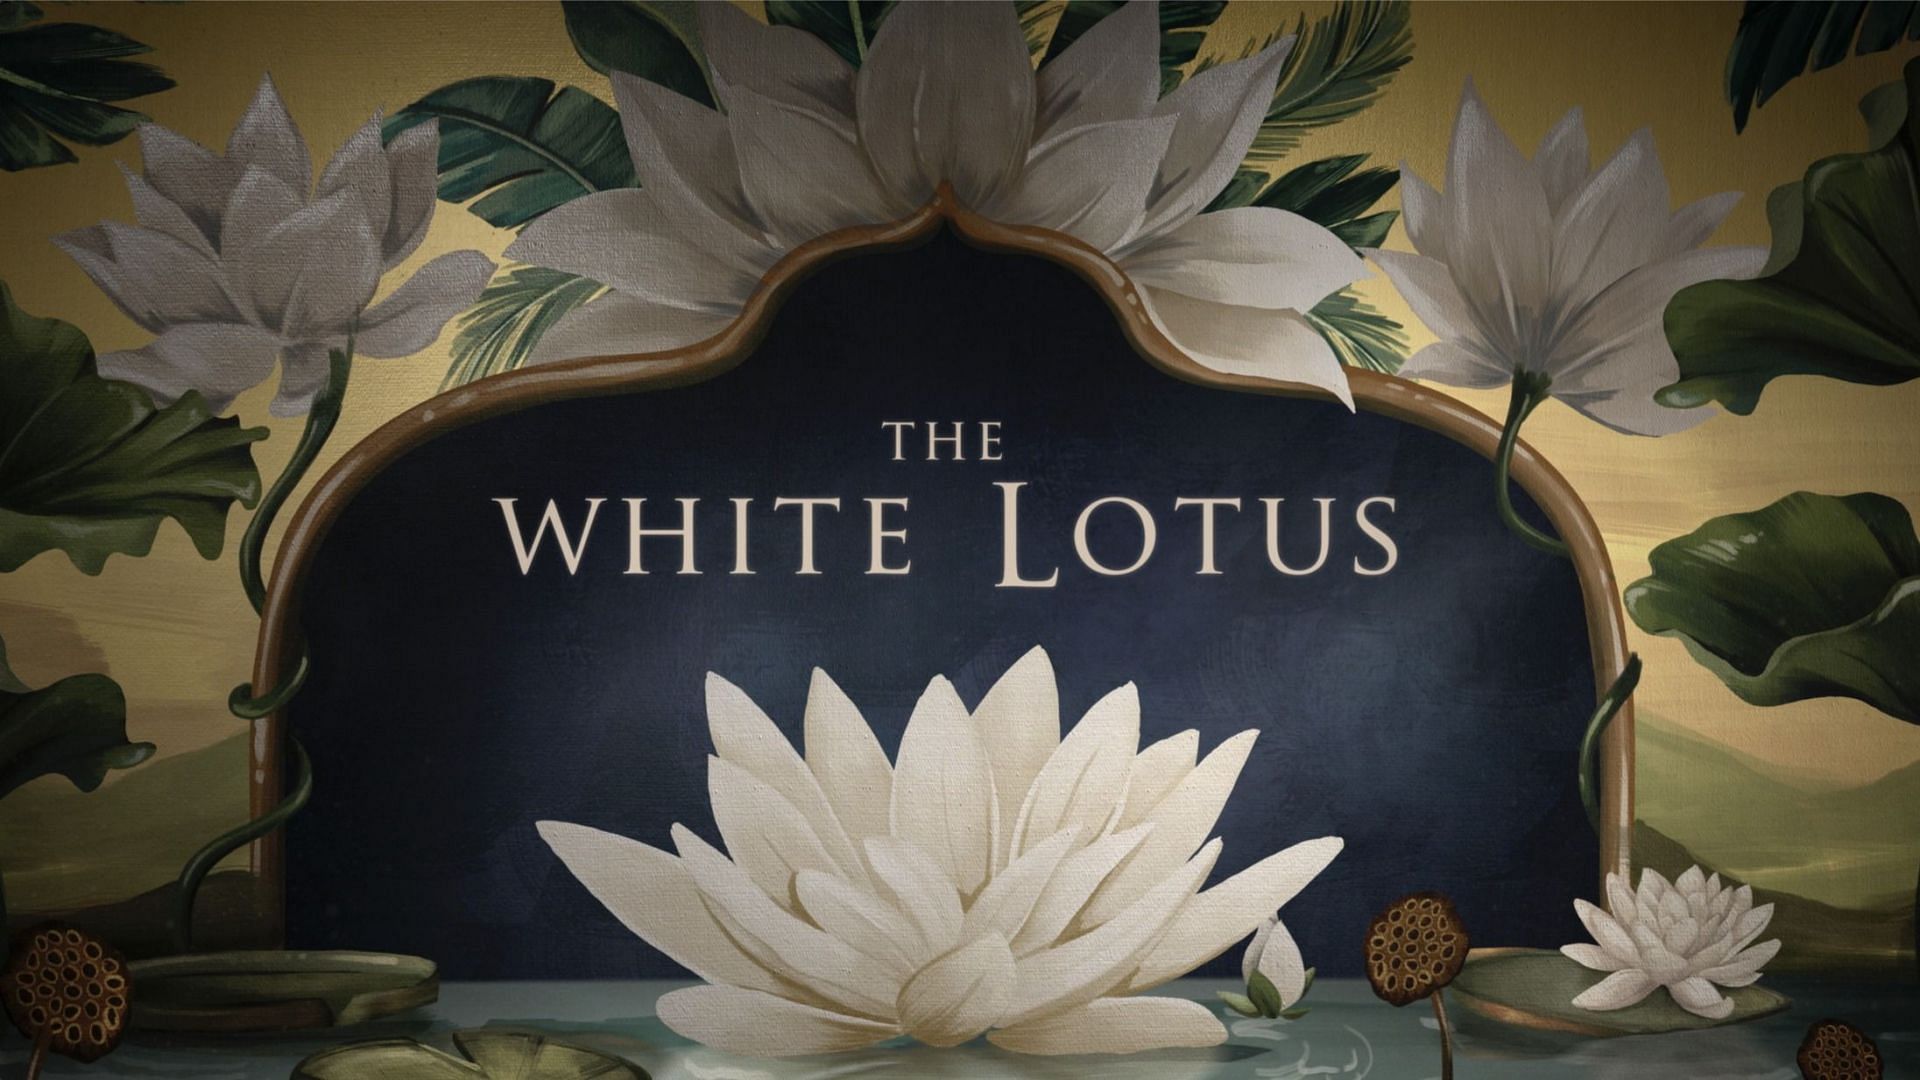 5 beautiful cities The White Lotus Season 3 should be filmed at (Image via HBO)